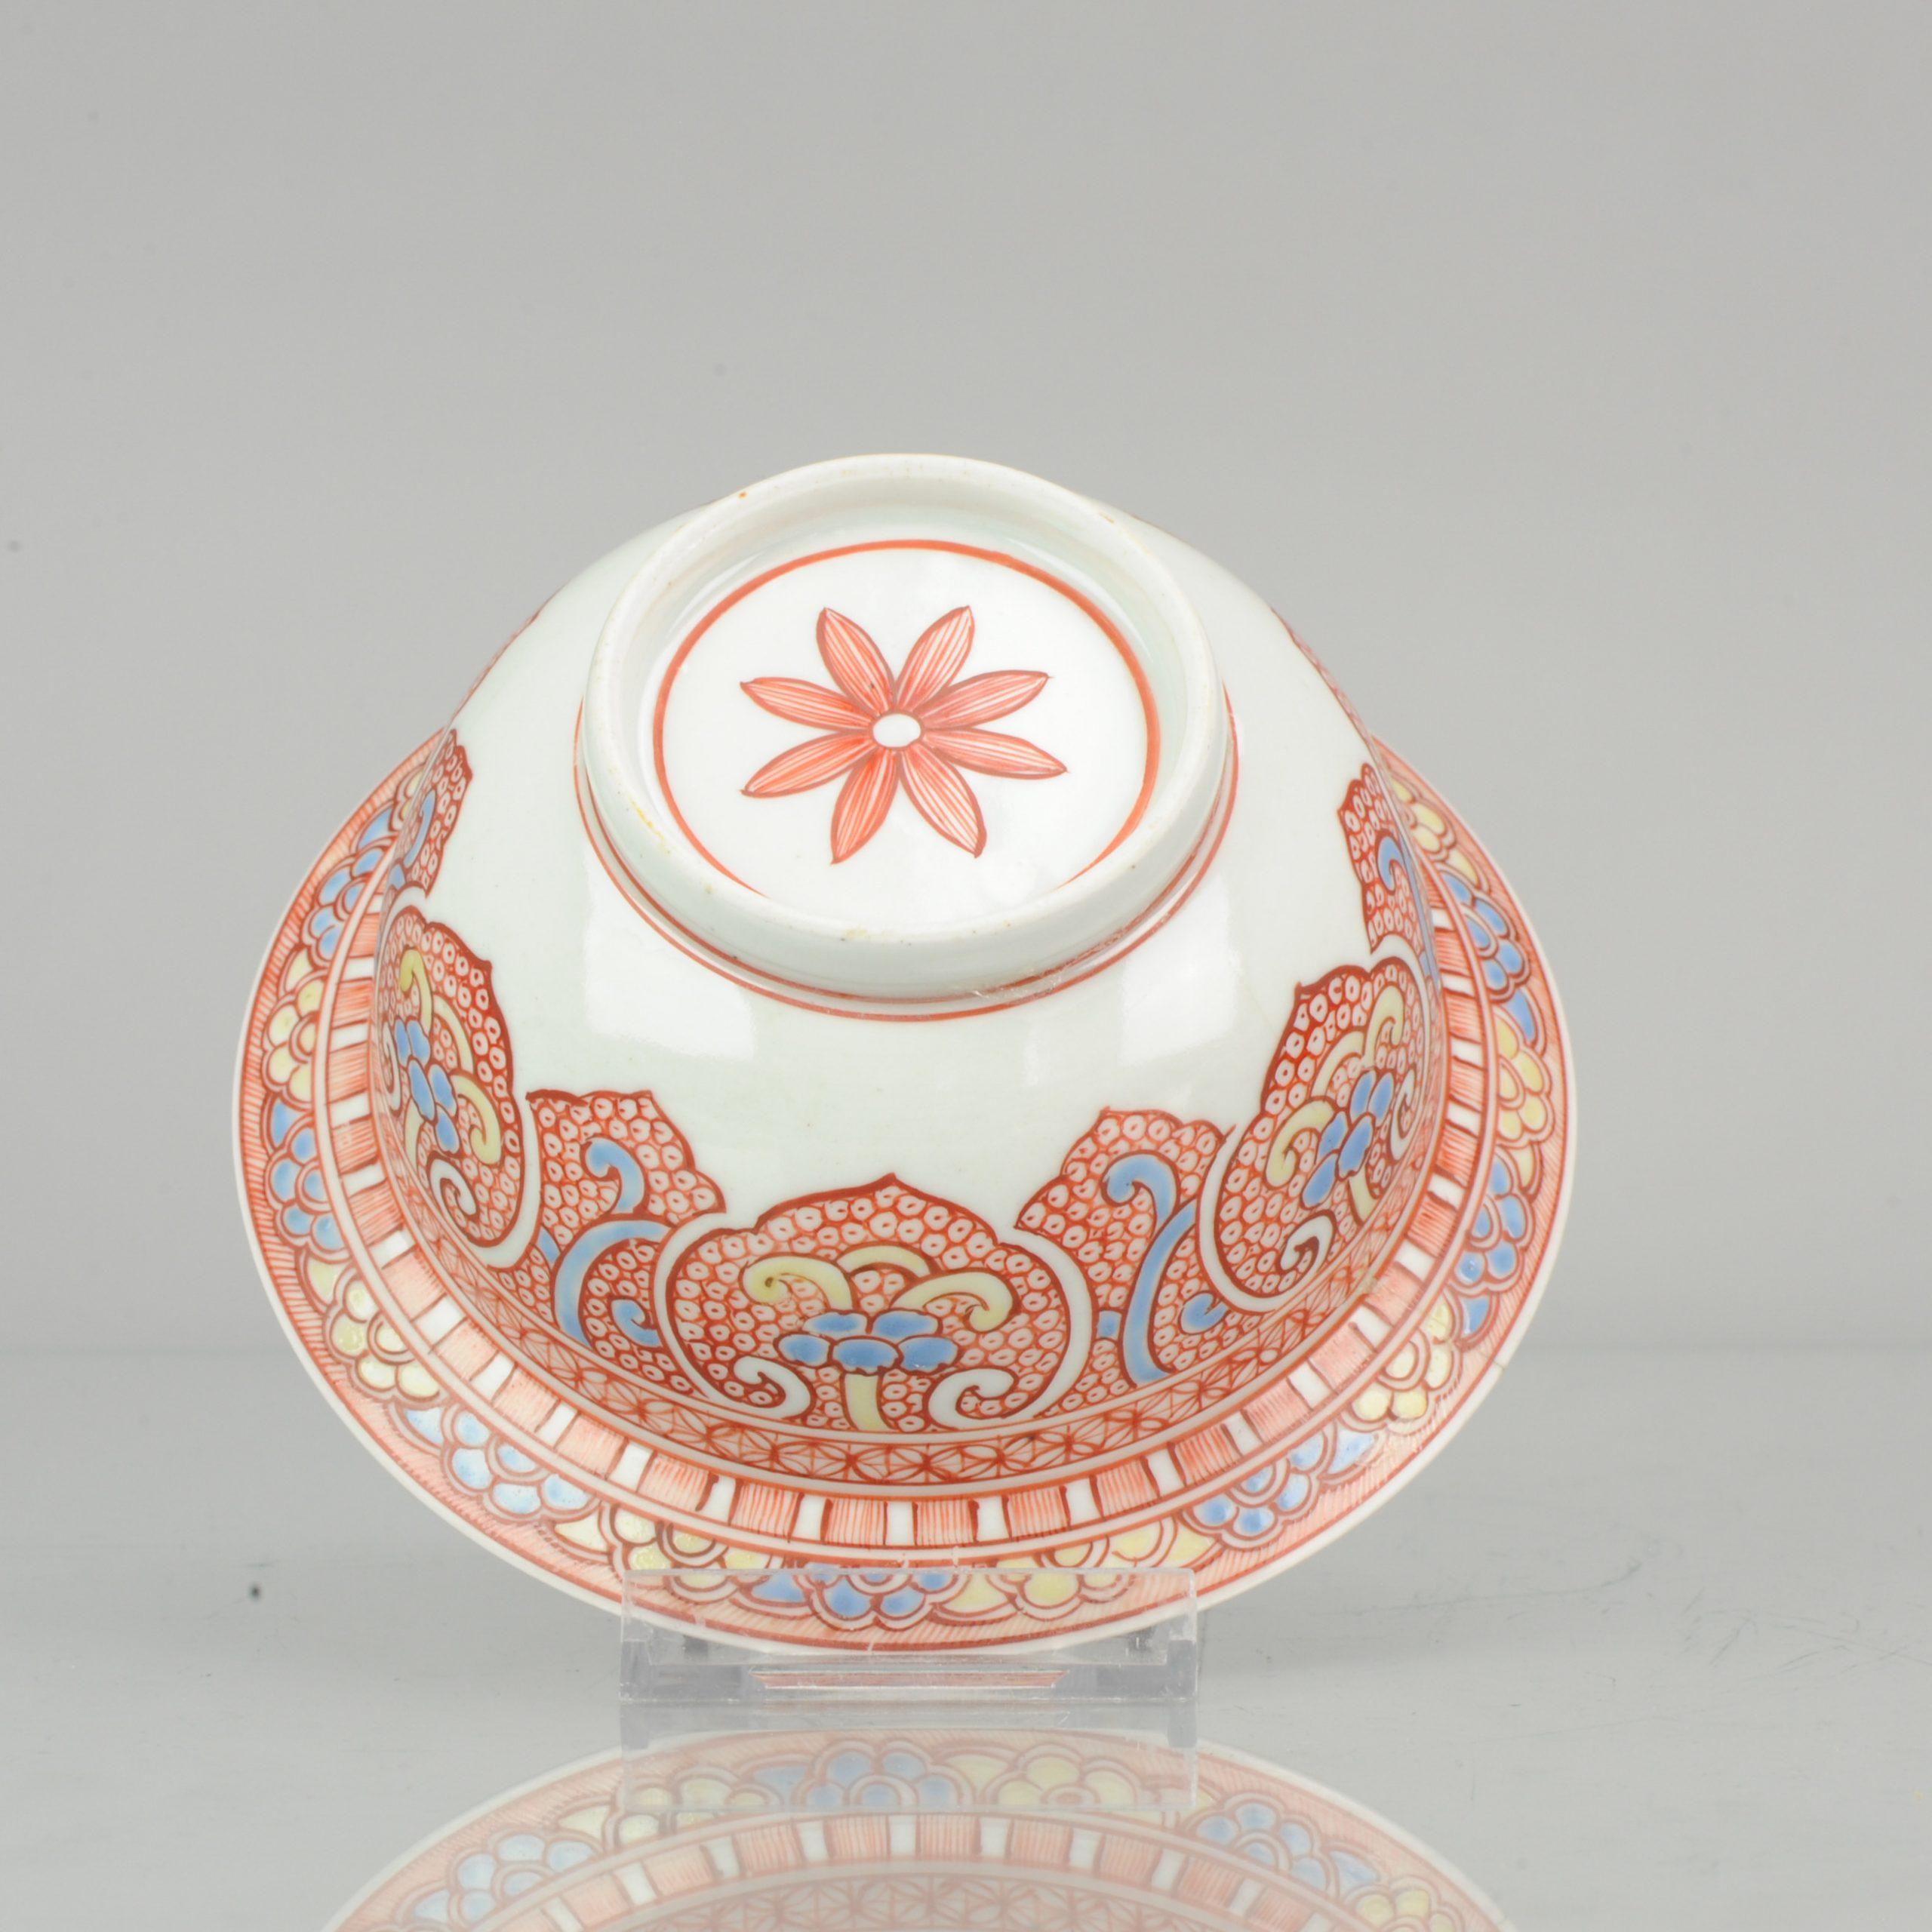 18th Century and Earlier Antique Chinese Porcelain Bowl SE Asian Thai / Malay Market Bencharong For Sale